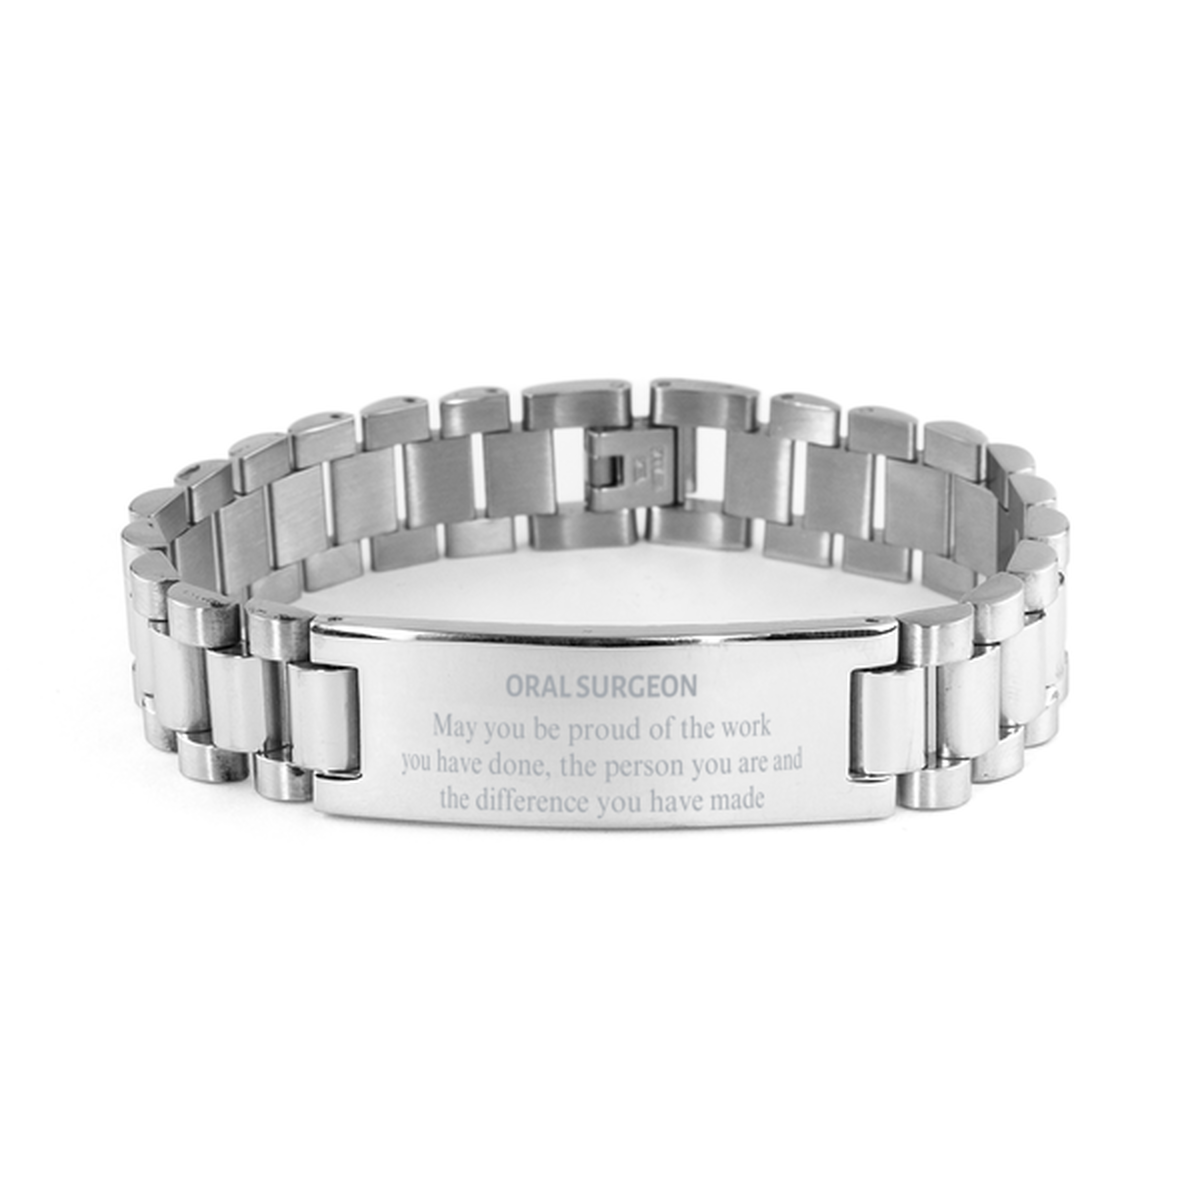 Oral Surgeon May you be proud of the work you have done, Retirement Oral Surgeon Ladder Stainless Steel Bracelet for Colleague Appreciation Gifts Amazing for Oral Surgeon